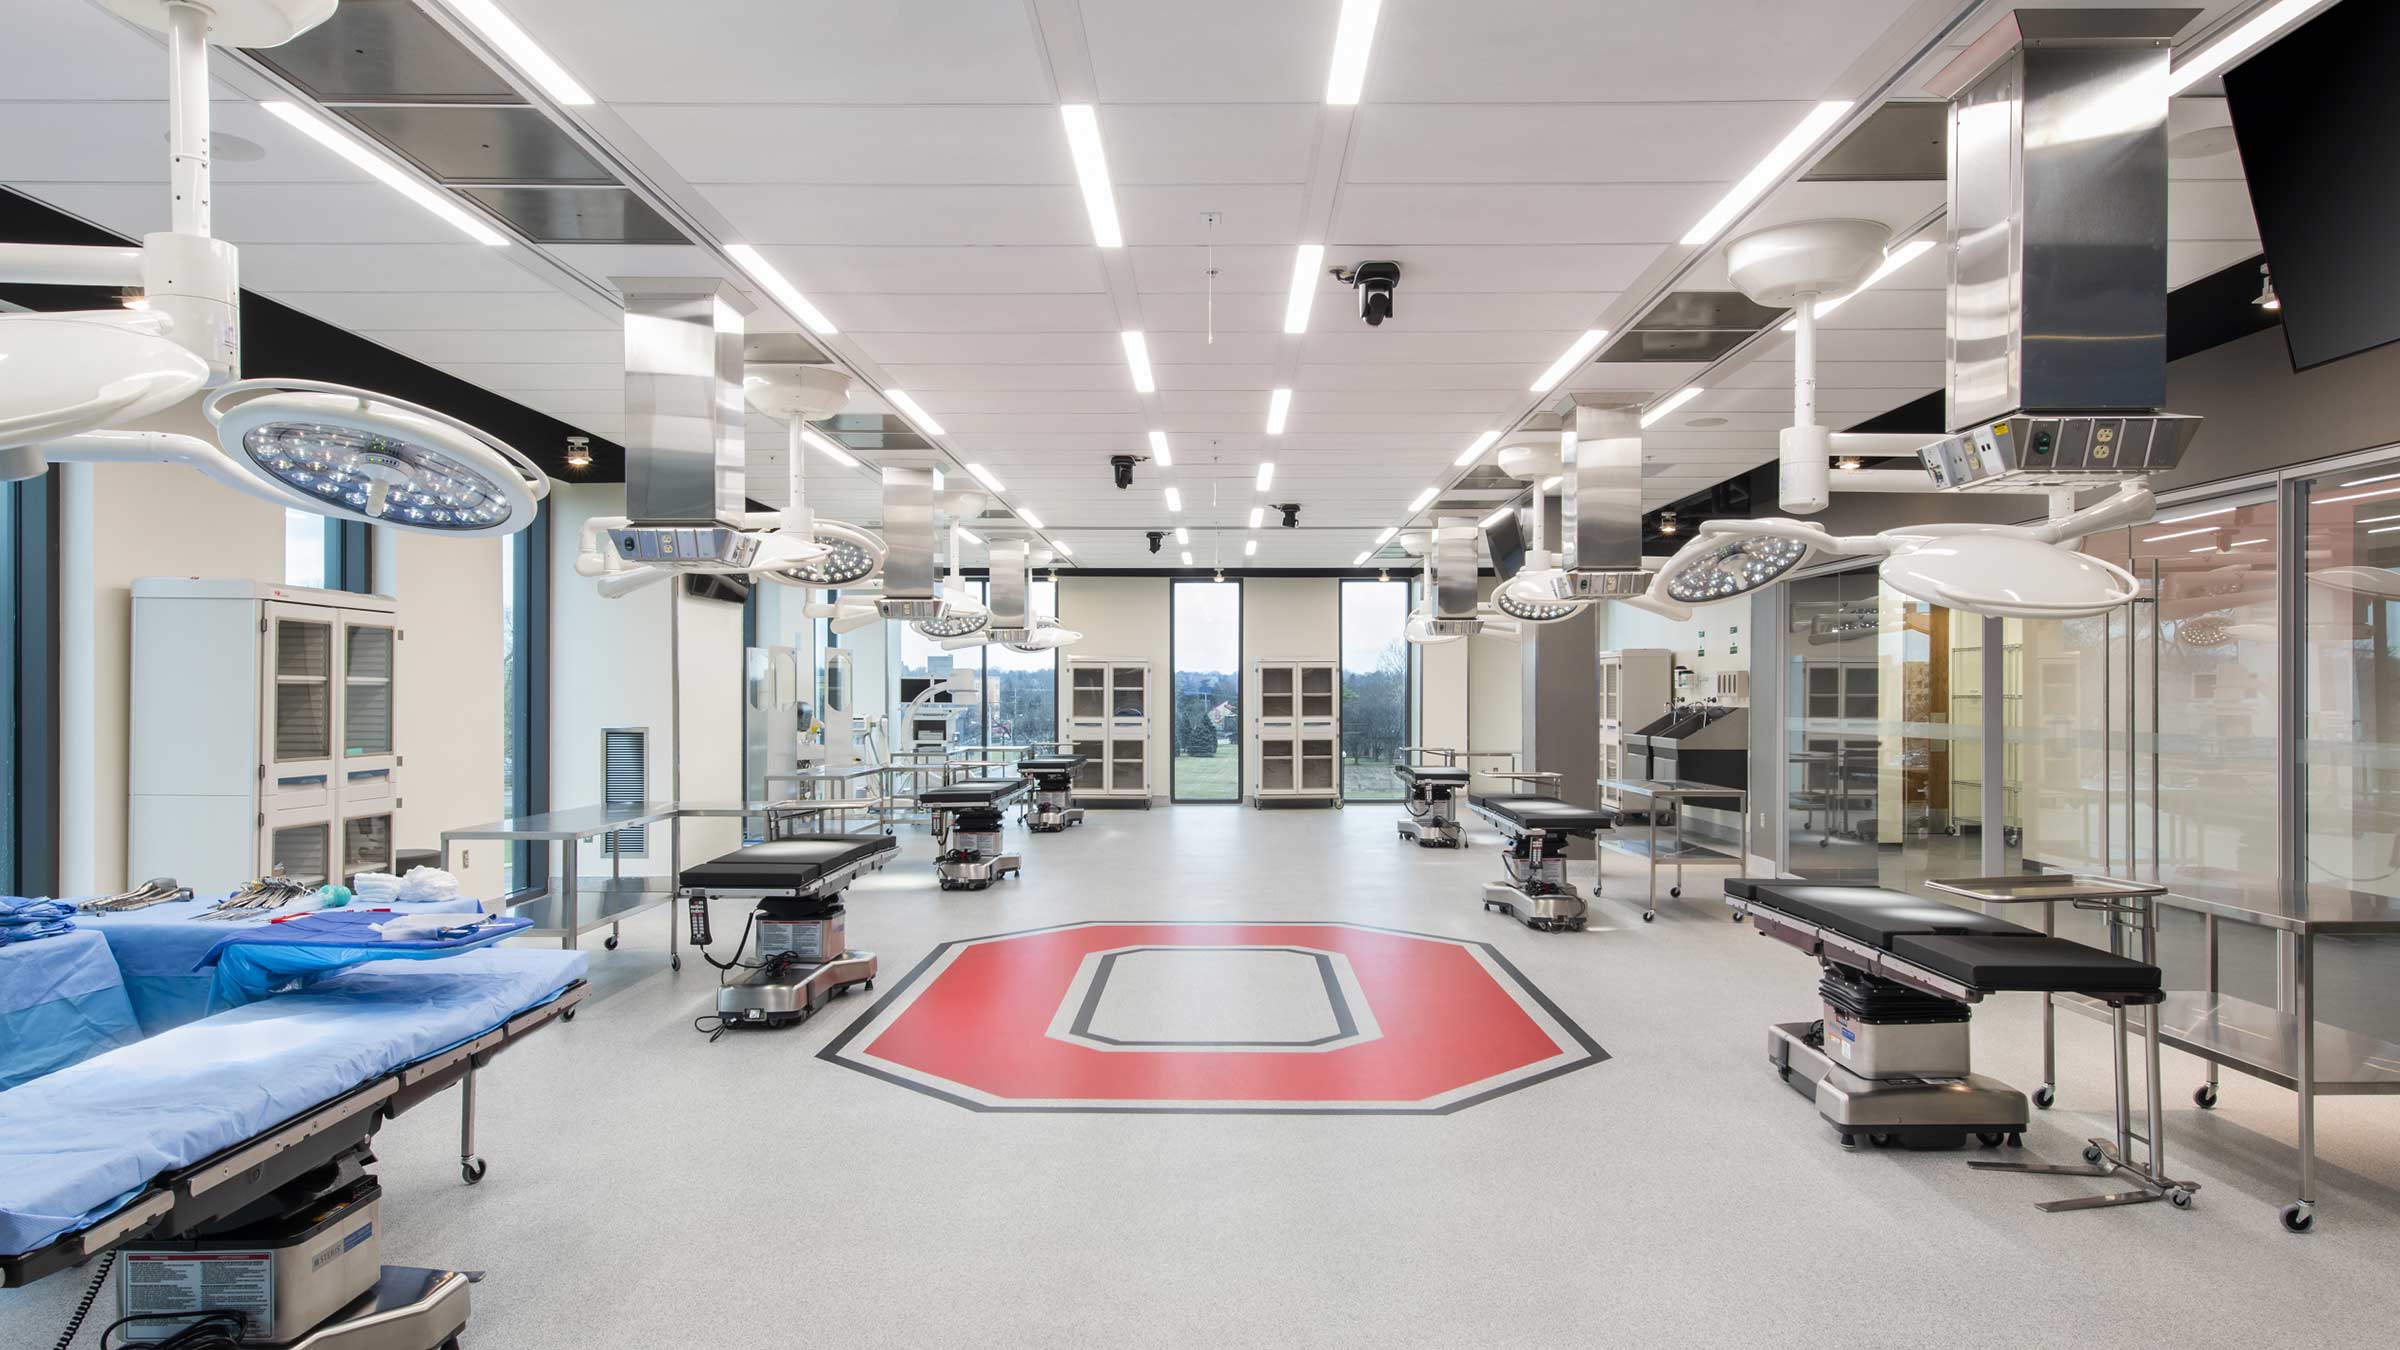 View of the Surgical Skills Lab at the Jameson Crane Sports Medicine Institute